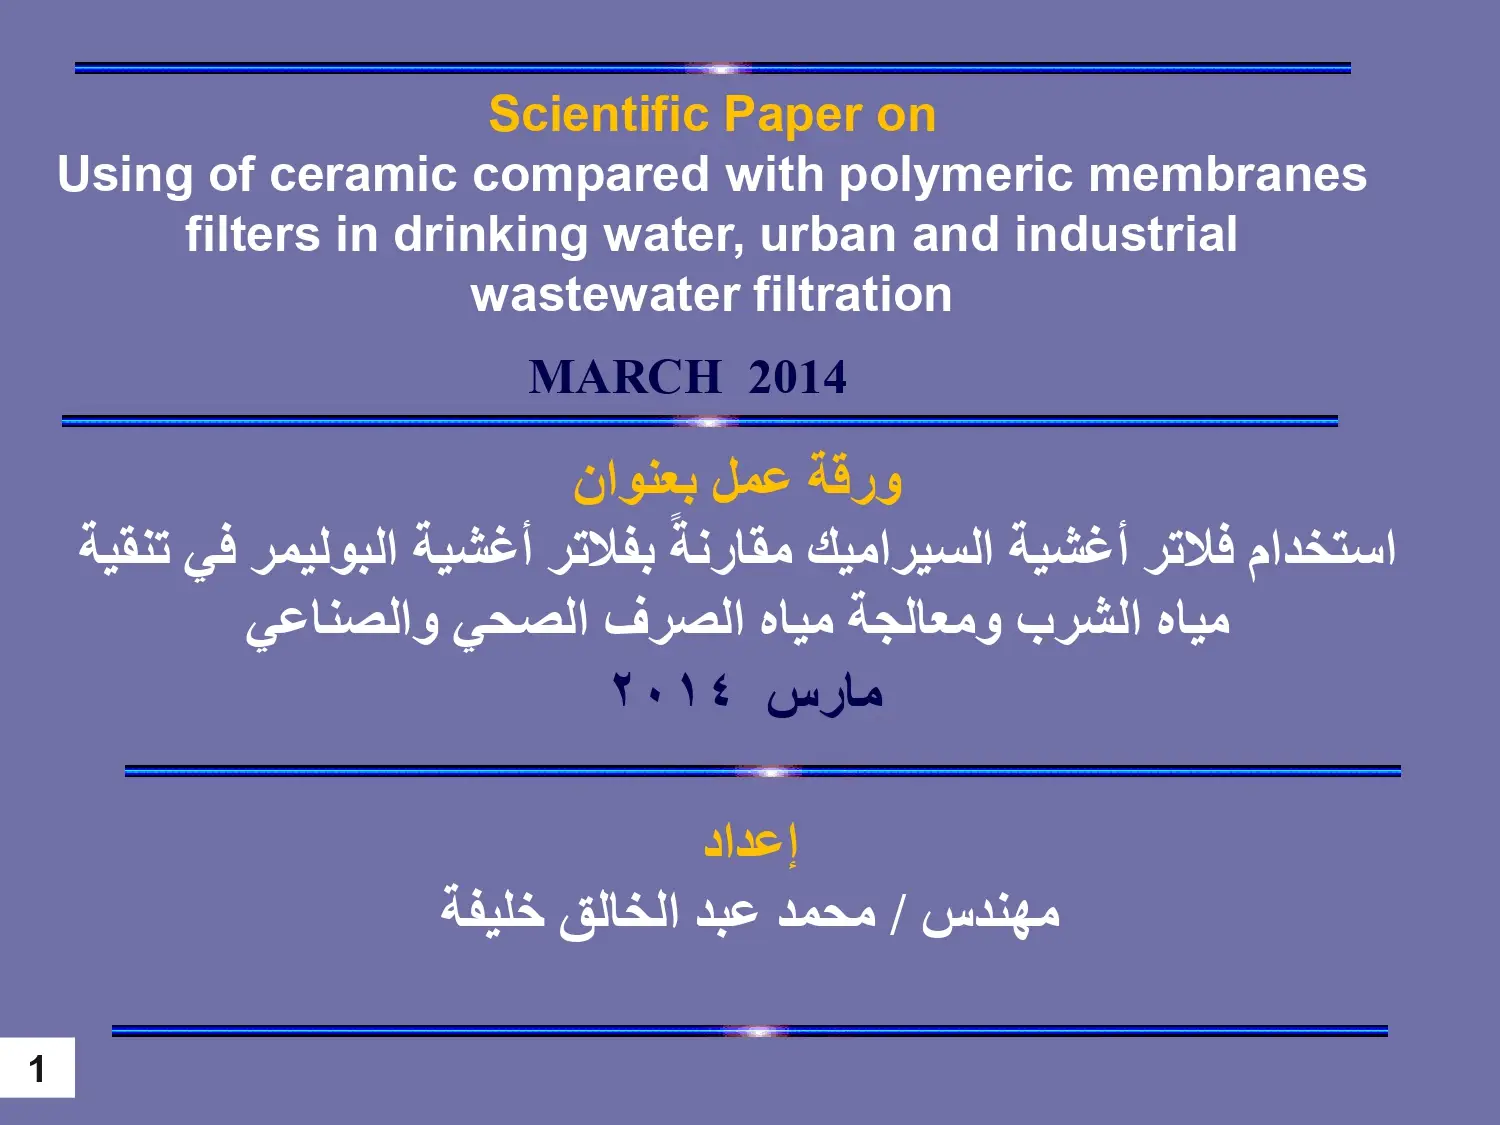 Using Of Ceramic Compared With Polymeric Membranes Filters In Drinking Water, Urban And Industrial Wastewater Filtration